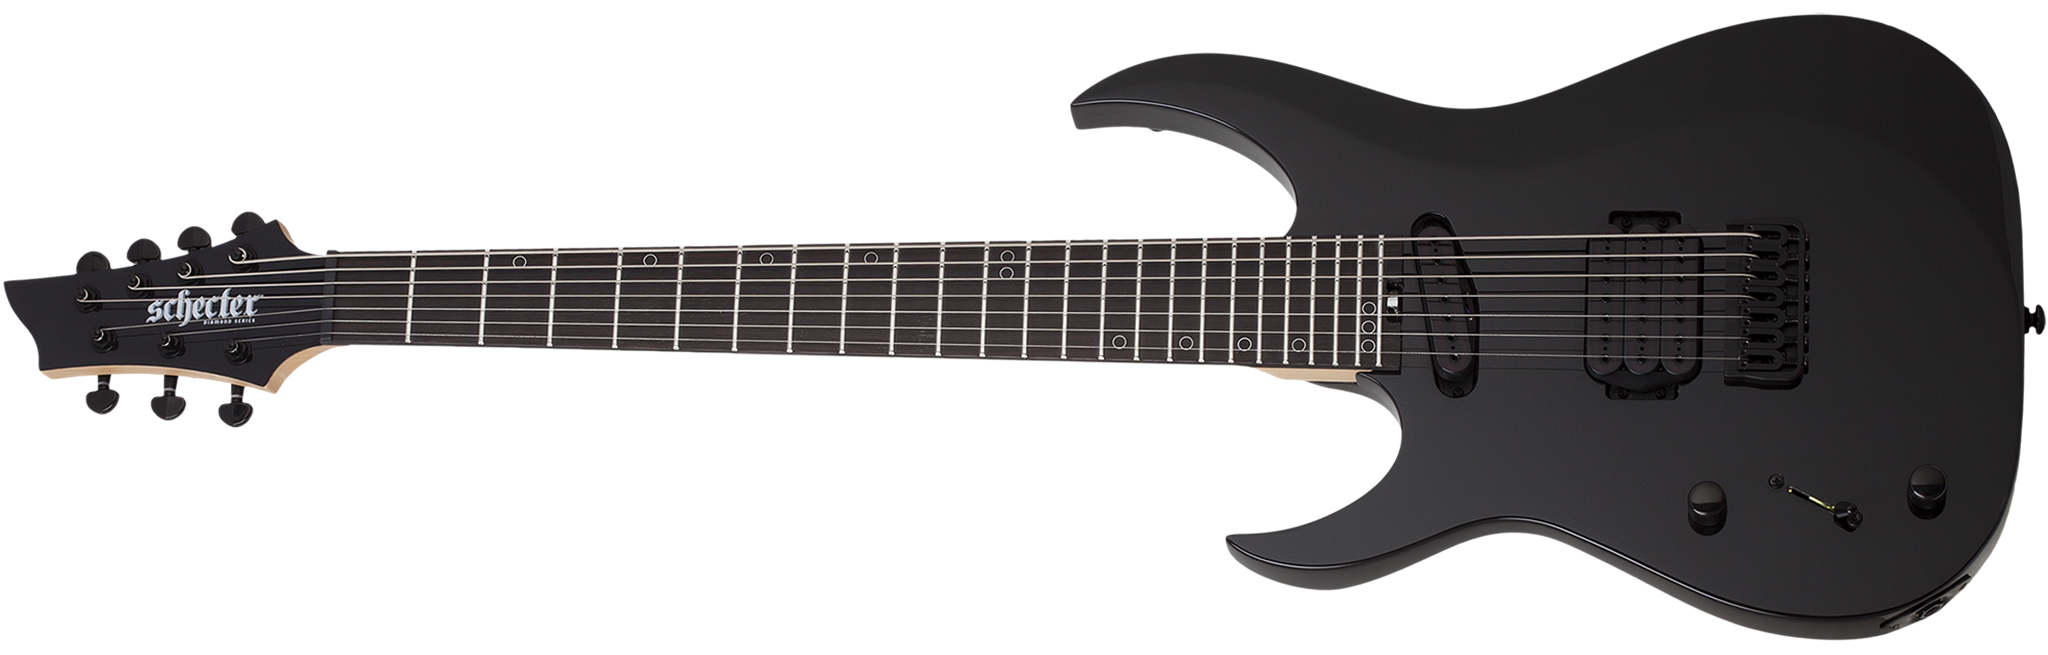 Schecter DIAMOND SERIES Sunset-7 Triad Gloss Black Left Handed 7-String Electric Guitar